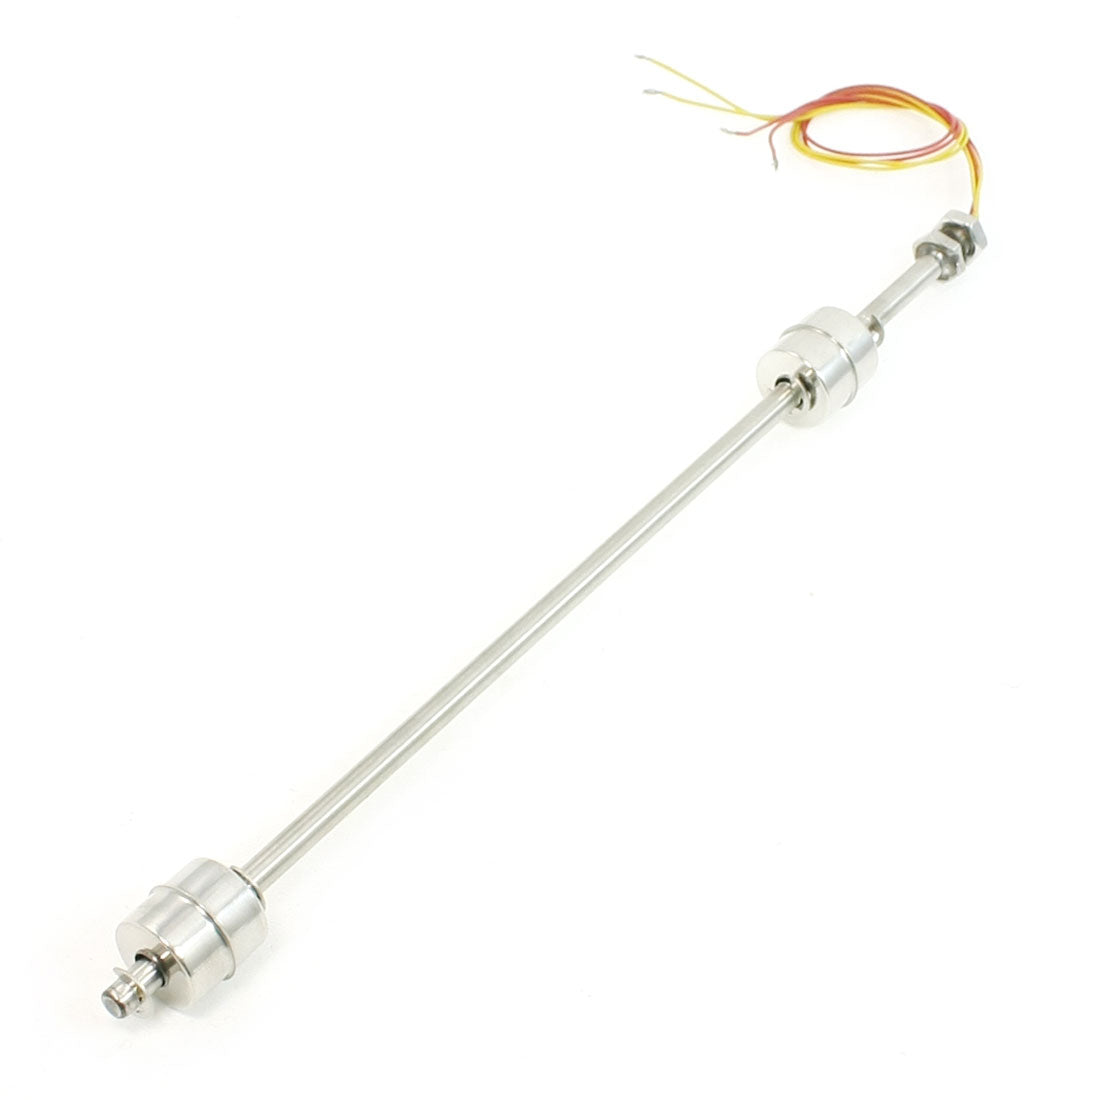 uxcell Uxcell Silver Tone Double Ball Water Level Sensor 37cm DC100V 0.5A 10W